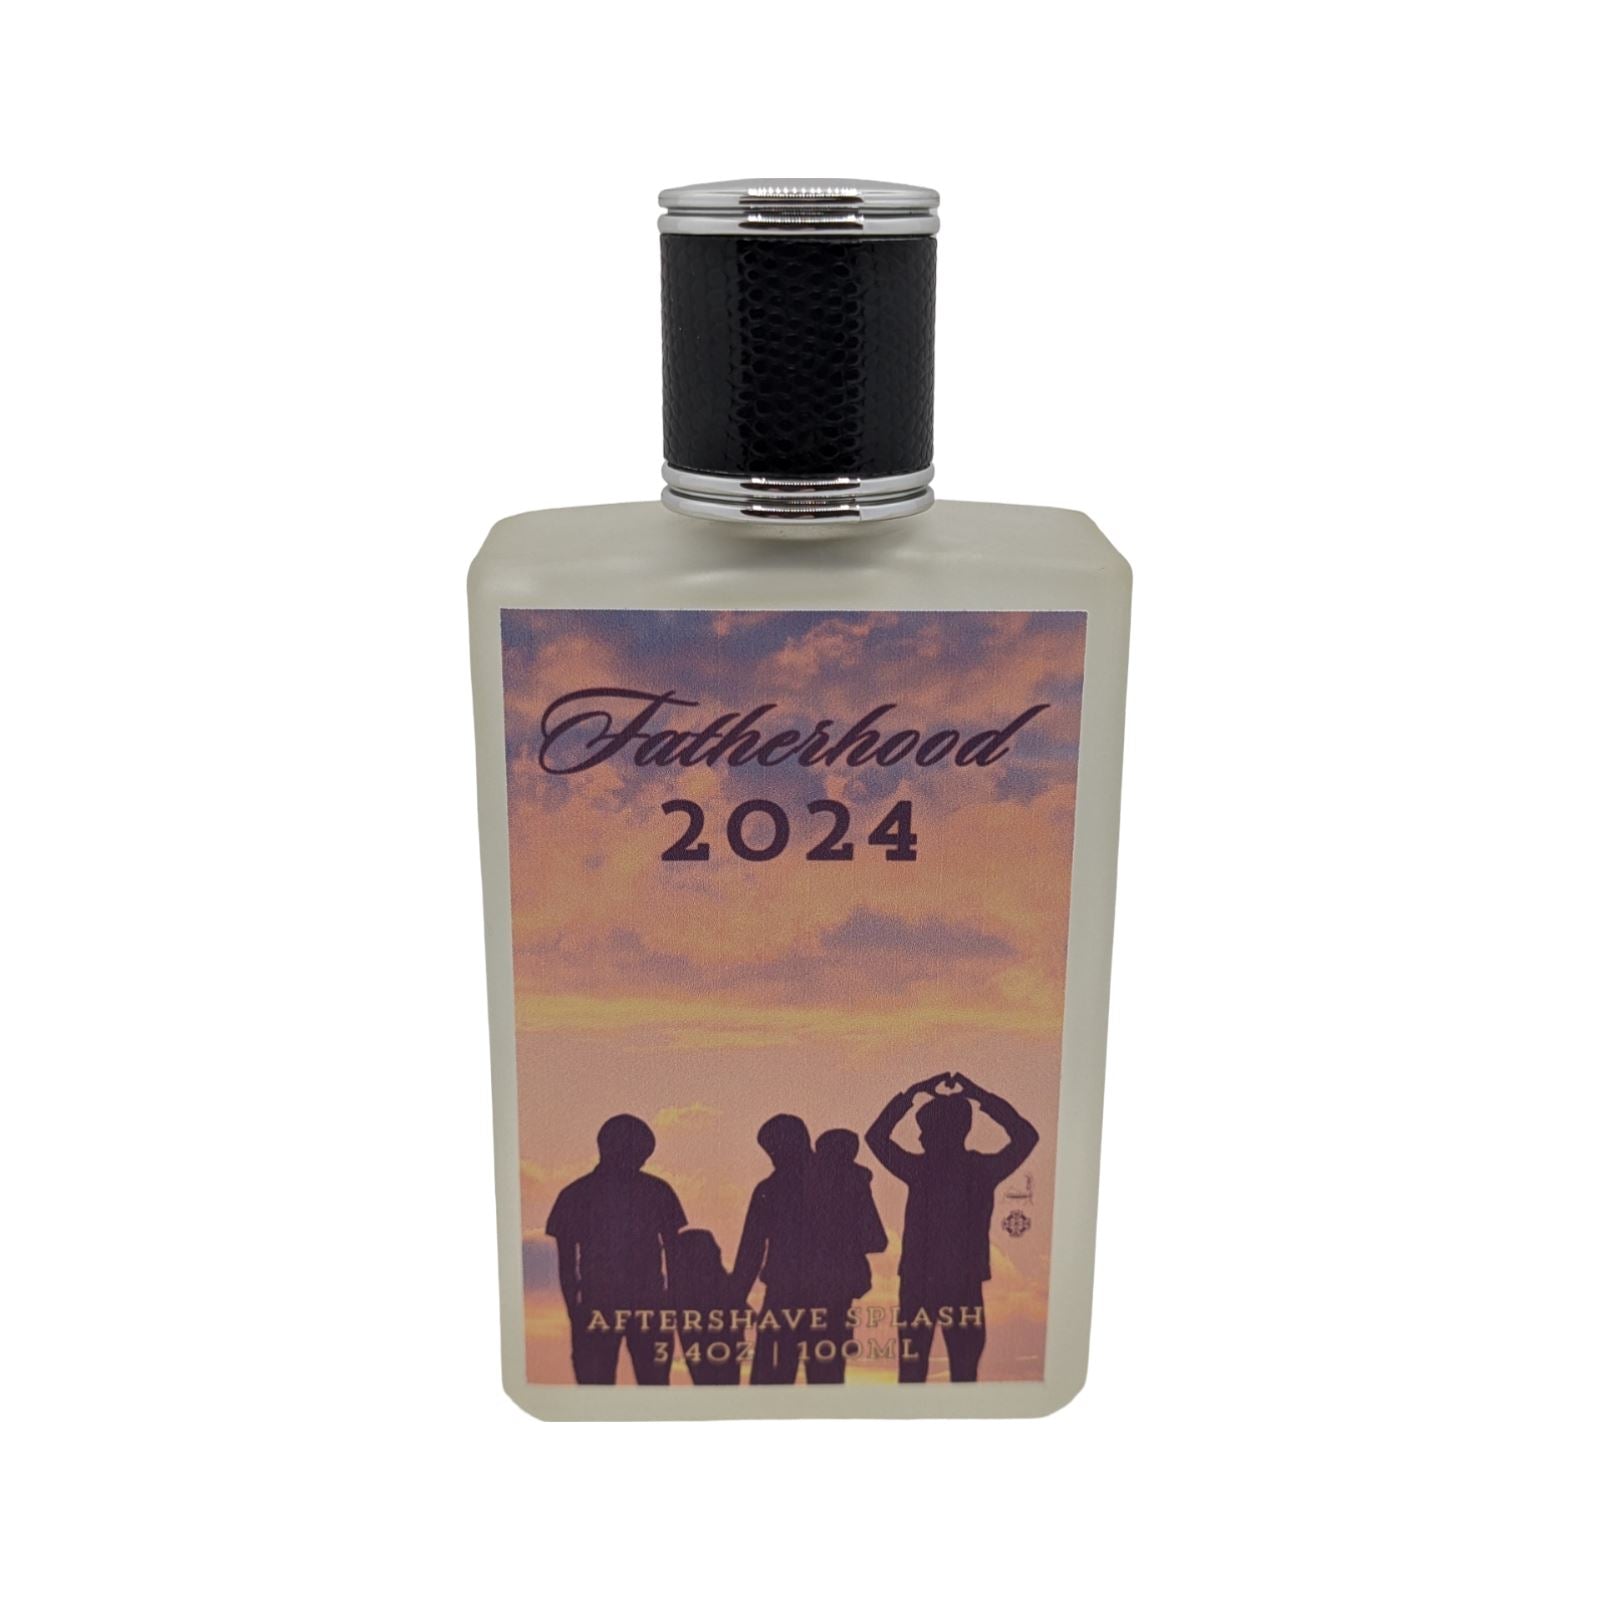 Limited Edition Fatherhood 2024 - Murphy and McNeil Shaving Soap Murphy and McNeil Store Aftershave Splash (Alcohol) 